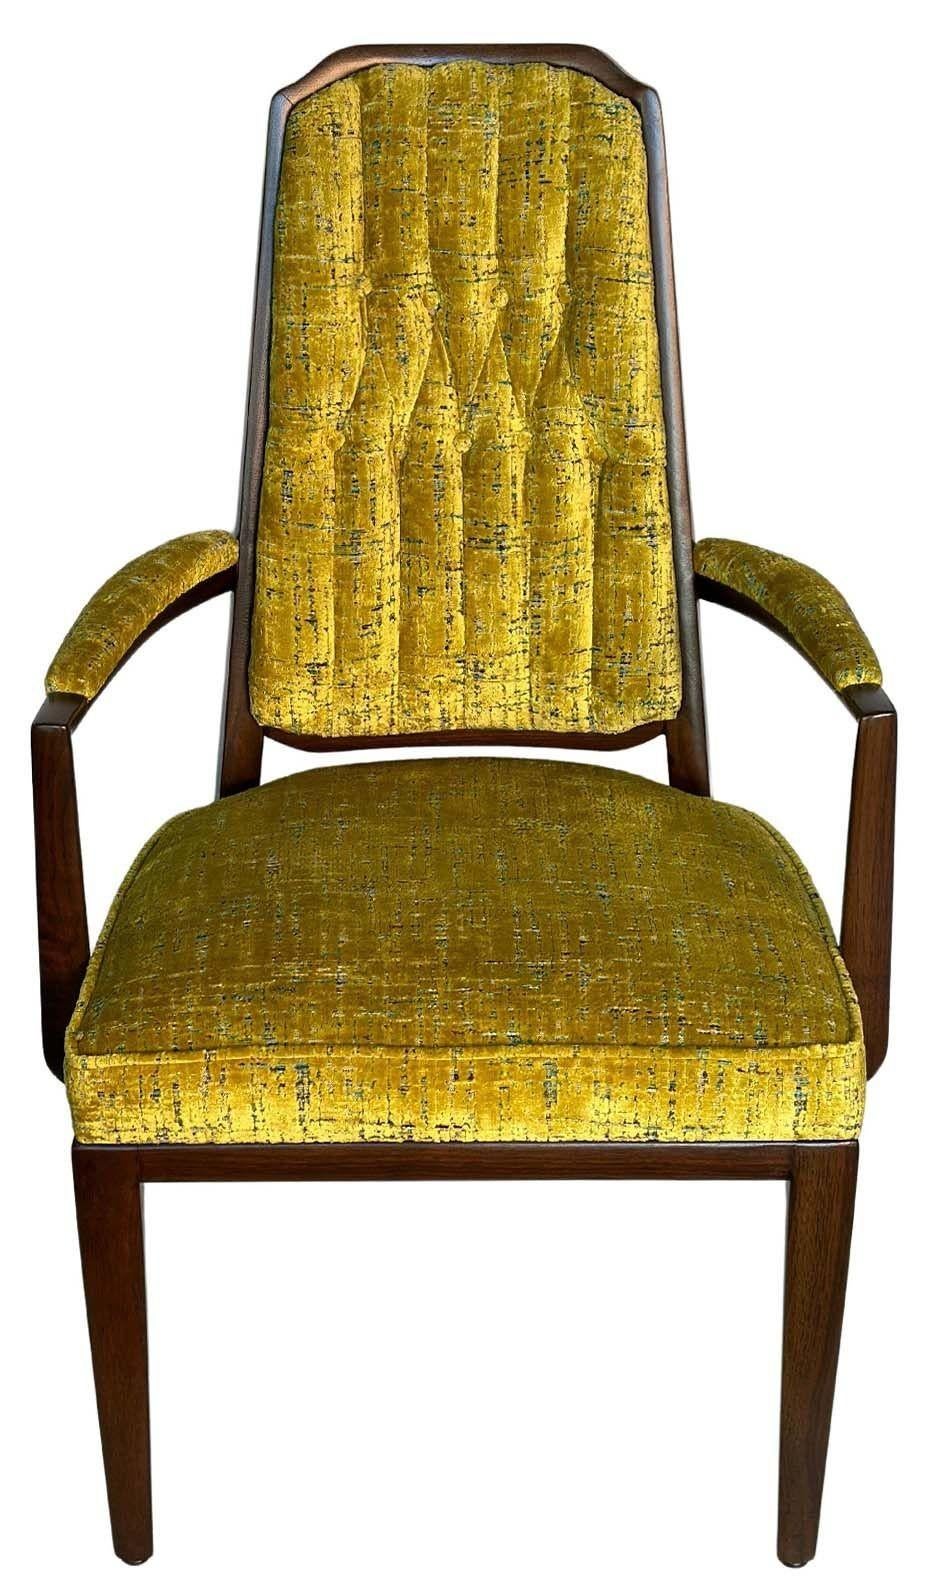 Vintage set of ten chairs by Monteverdi Young, made in USA, c. 1950's. The set consists of eight side chairs and two armchairs, each being newly upholstered with a unique soft green/mustard fabric and refinished walnut chair